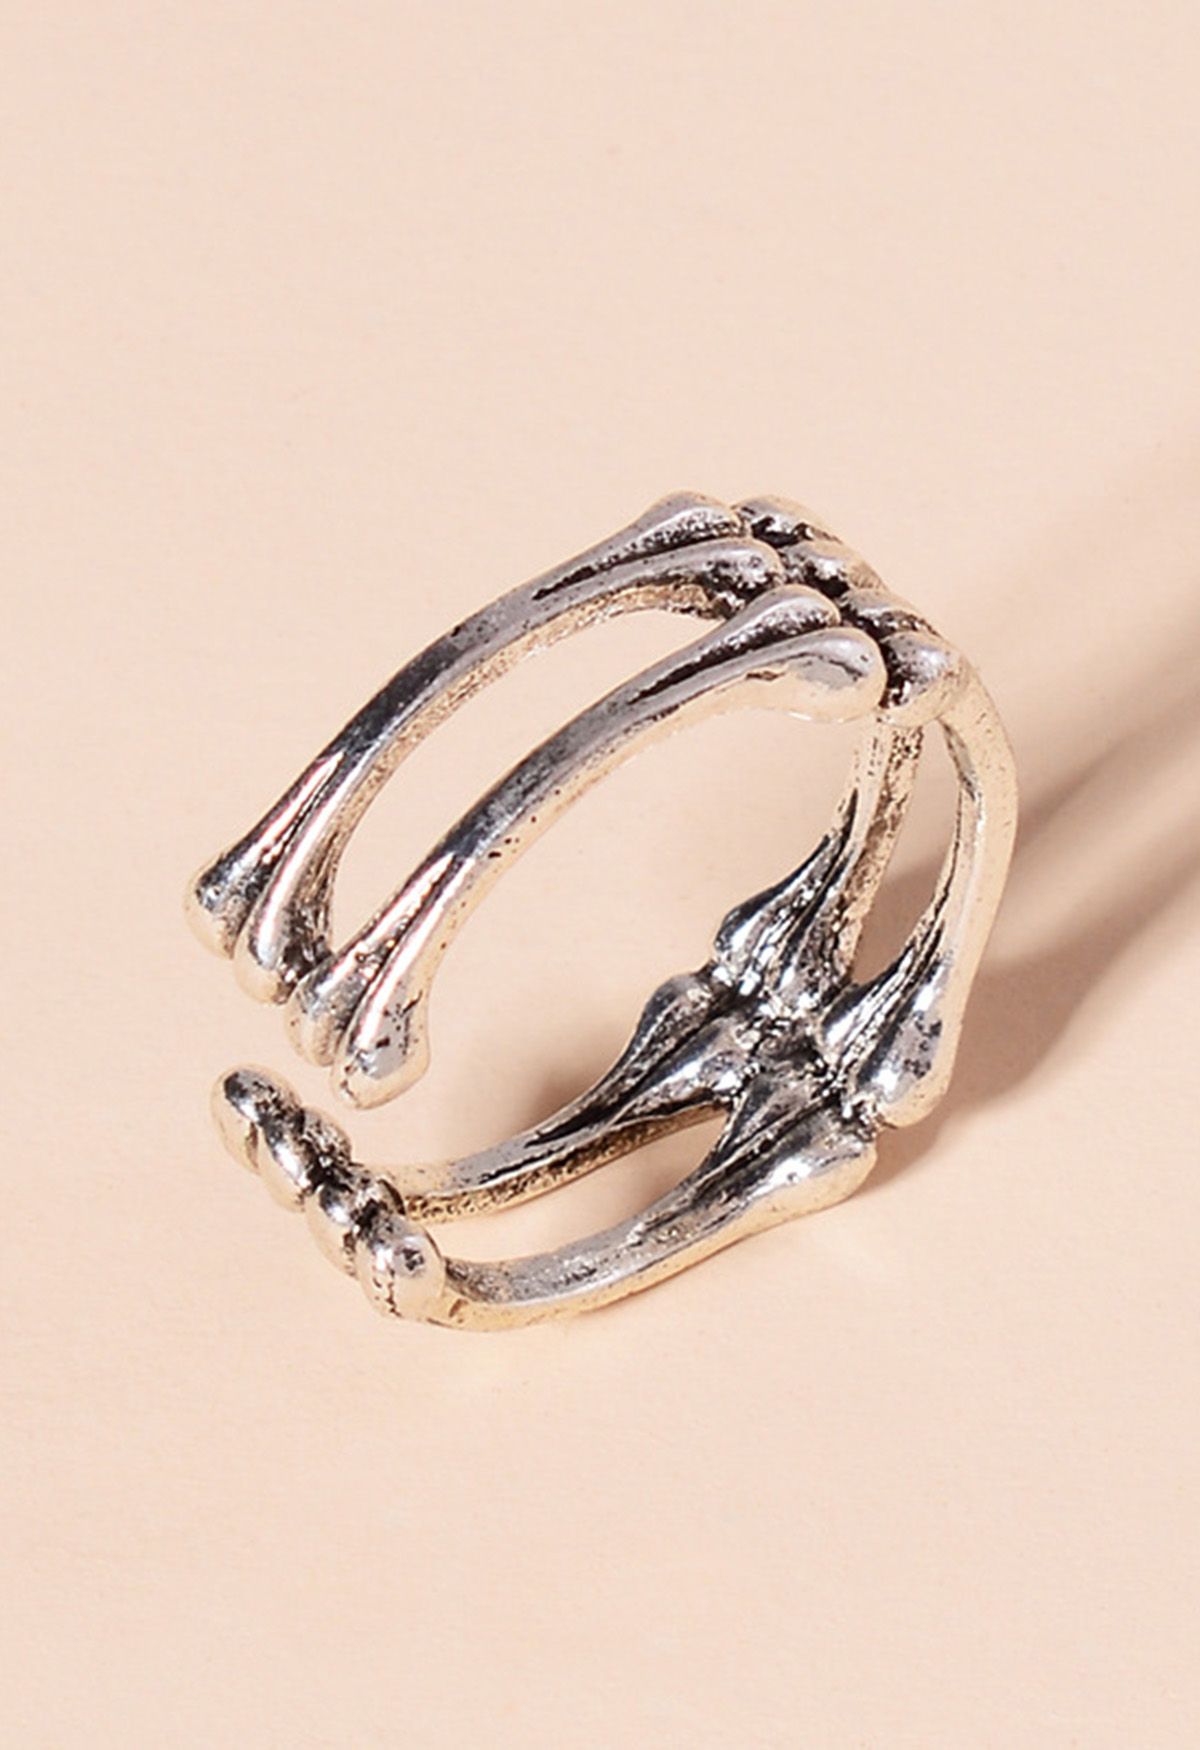 Connected Bones Silver Open Ring